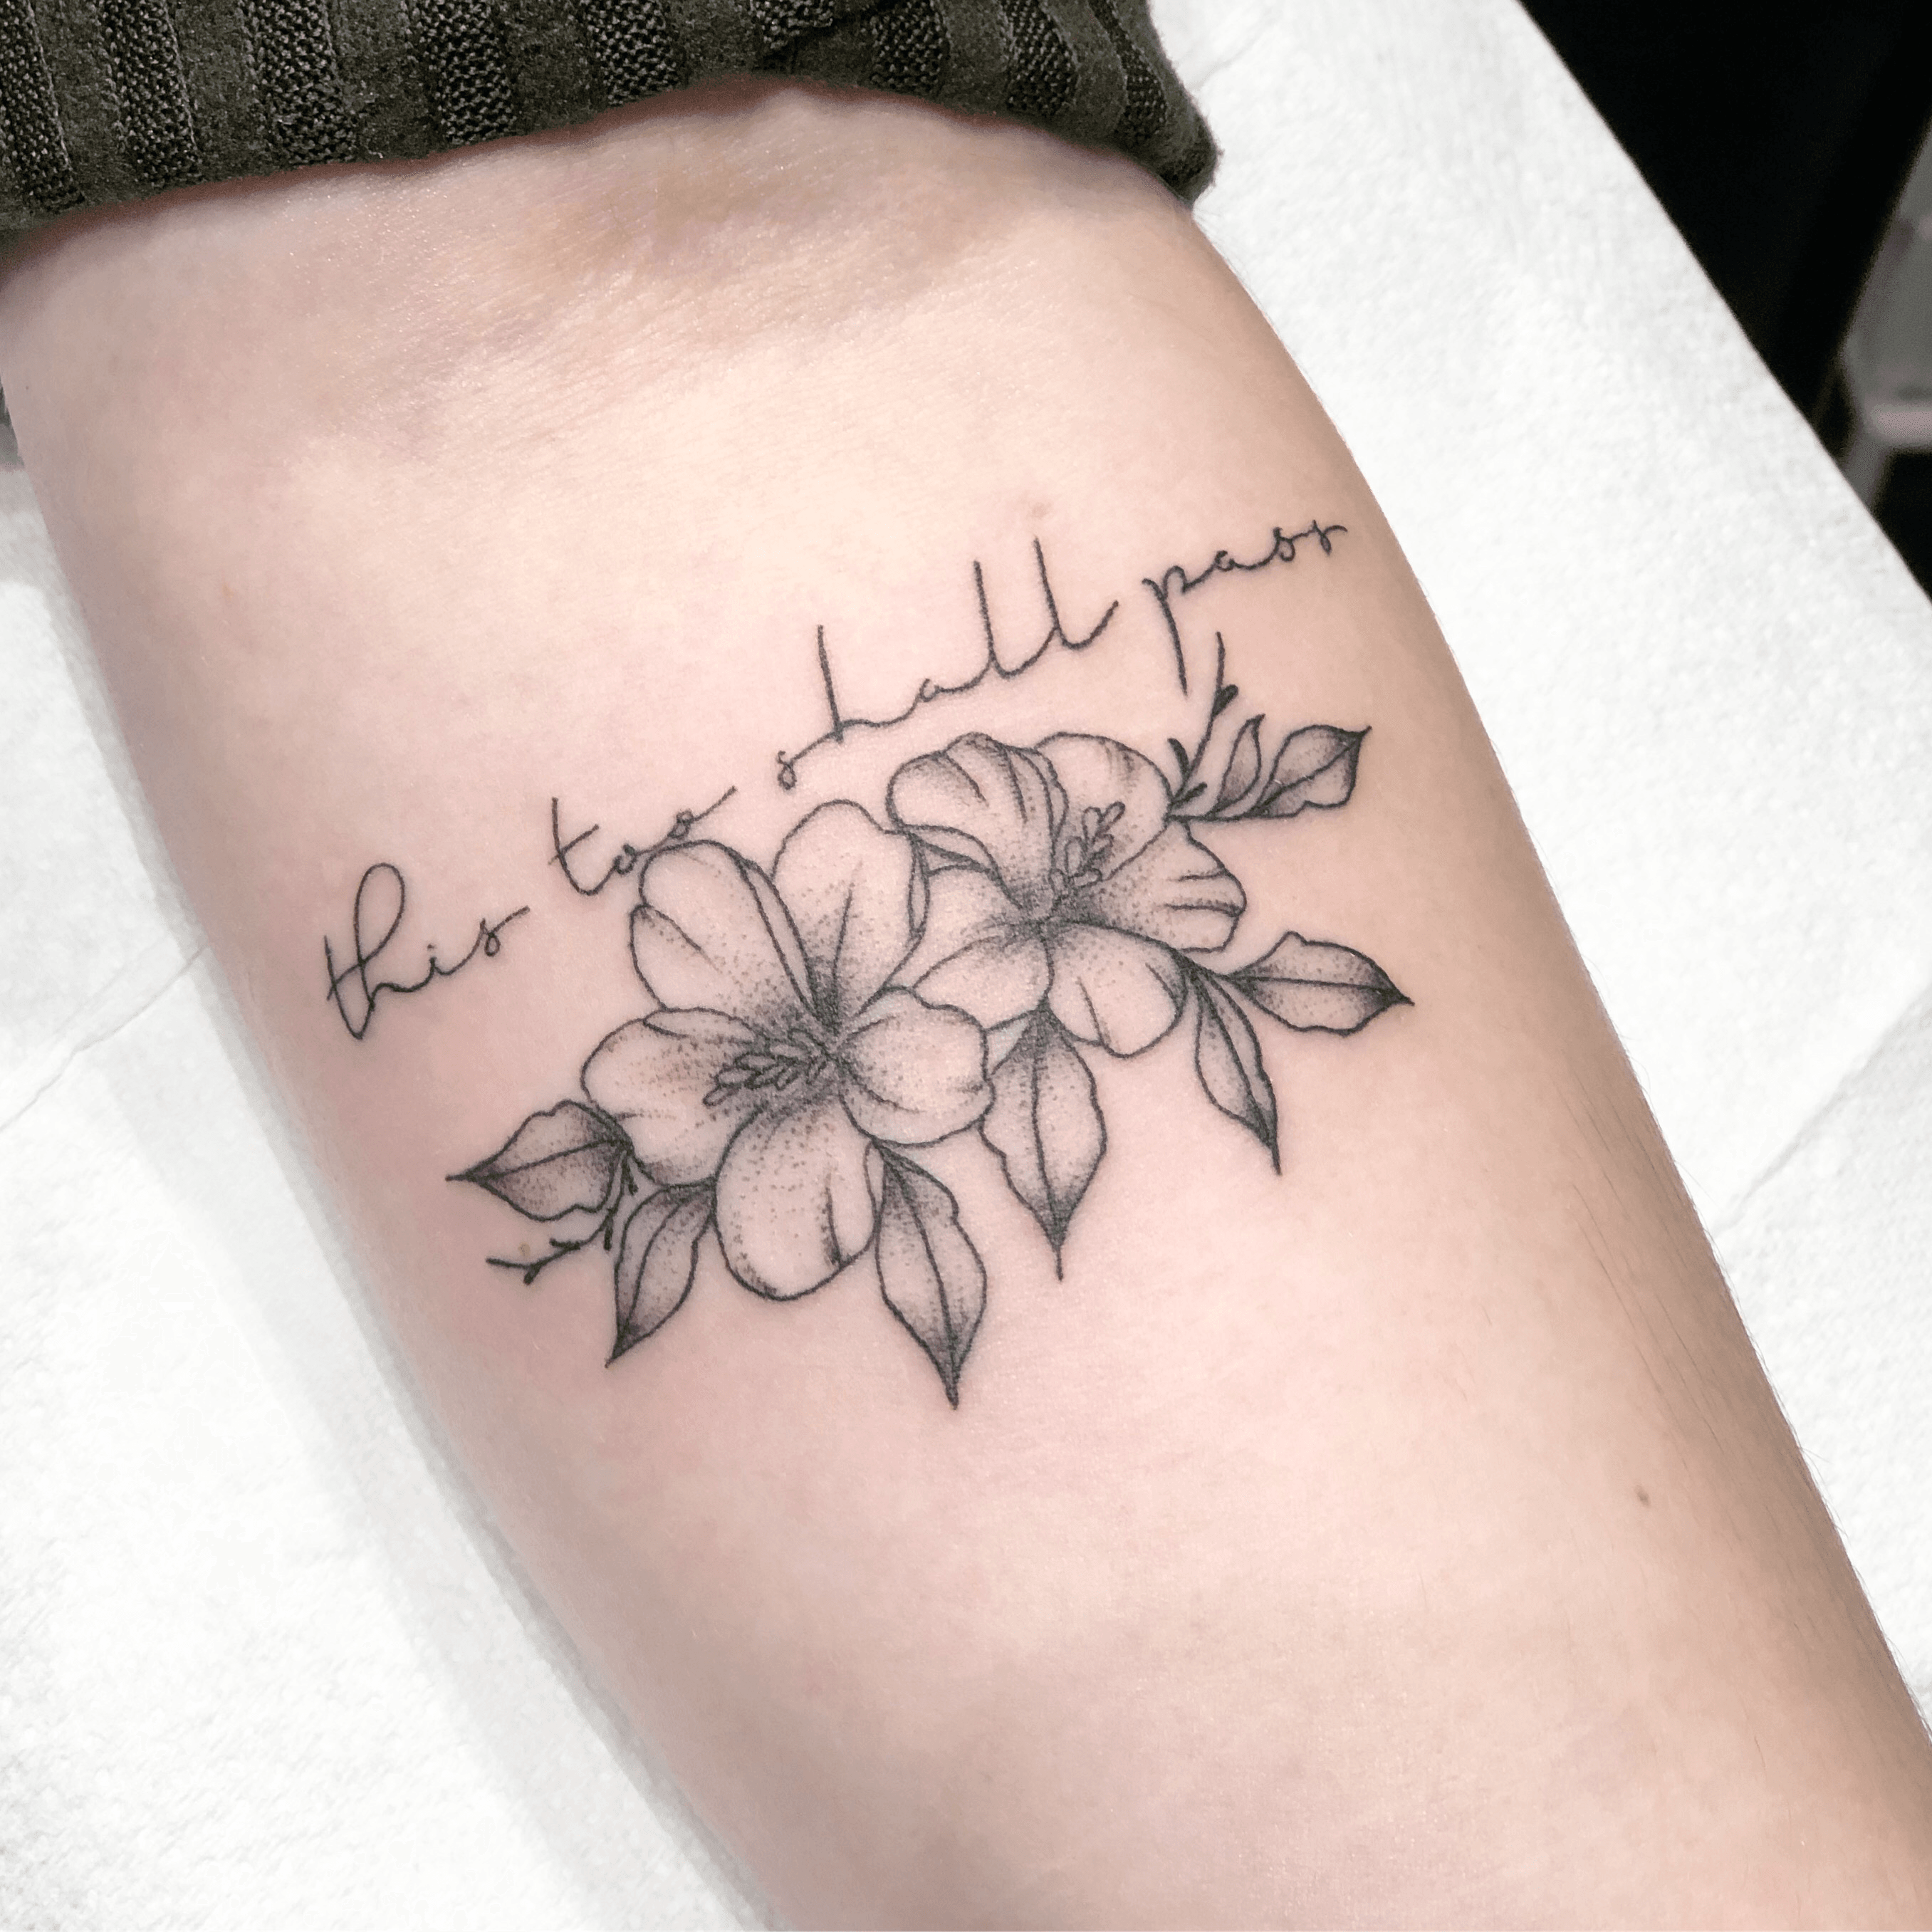 This too shall pass tattoo design on arm by subjecttochange on DeviantArt